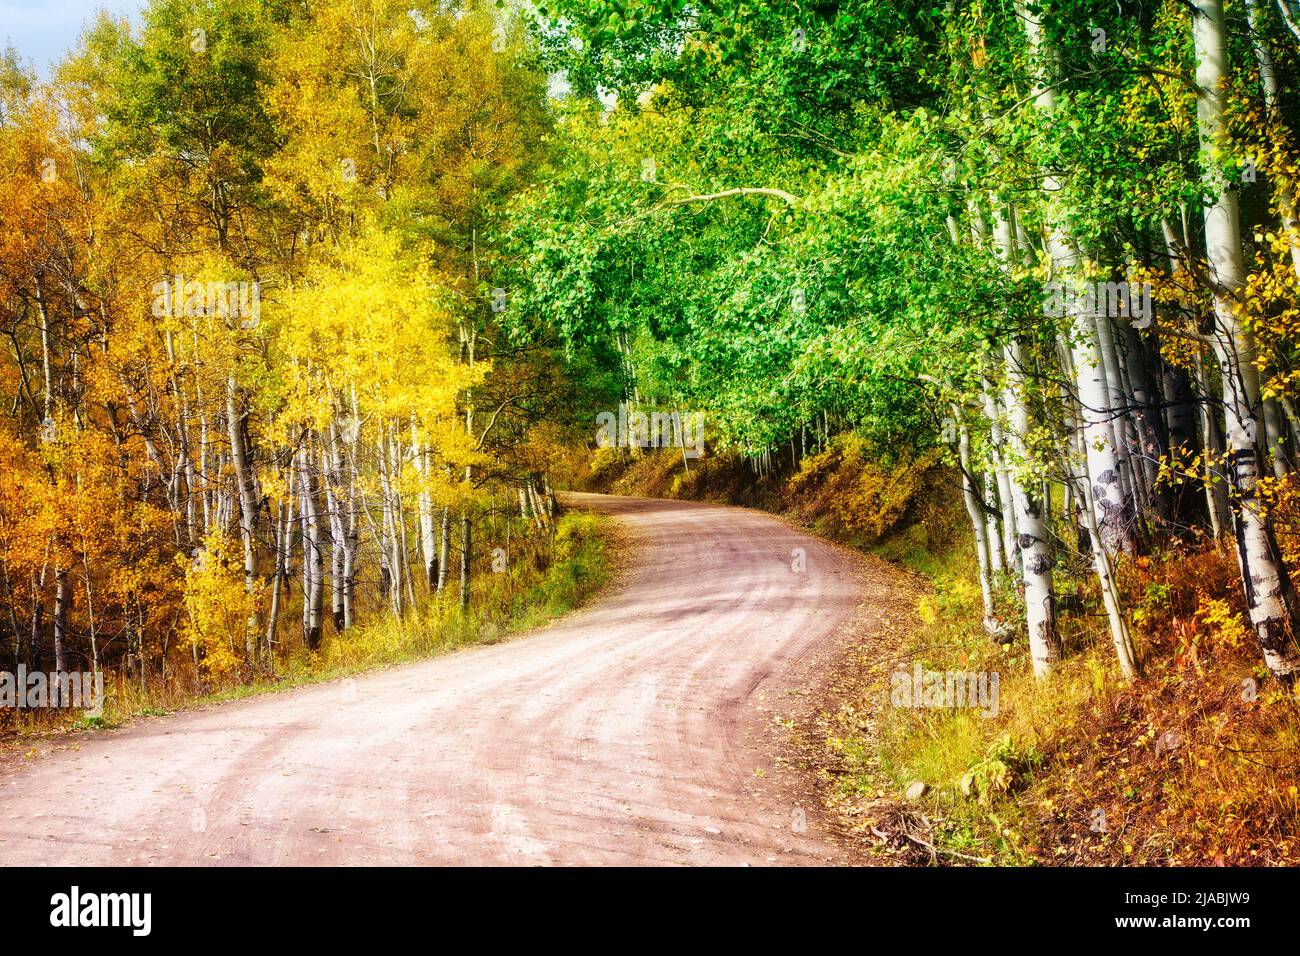 Ohio Pass Road winds it way through one of the largest aspen forests in the world in Colorado. Stock Photo